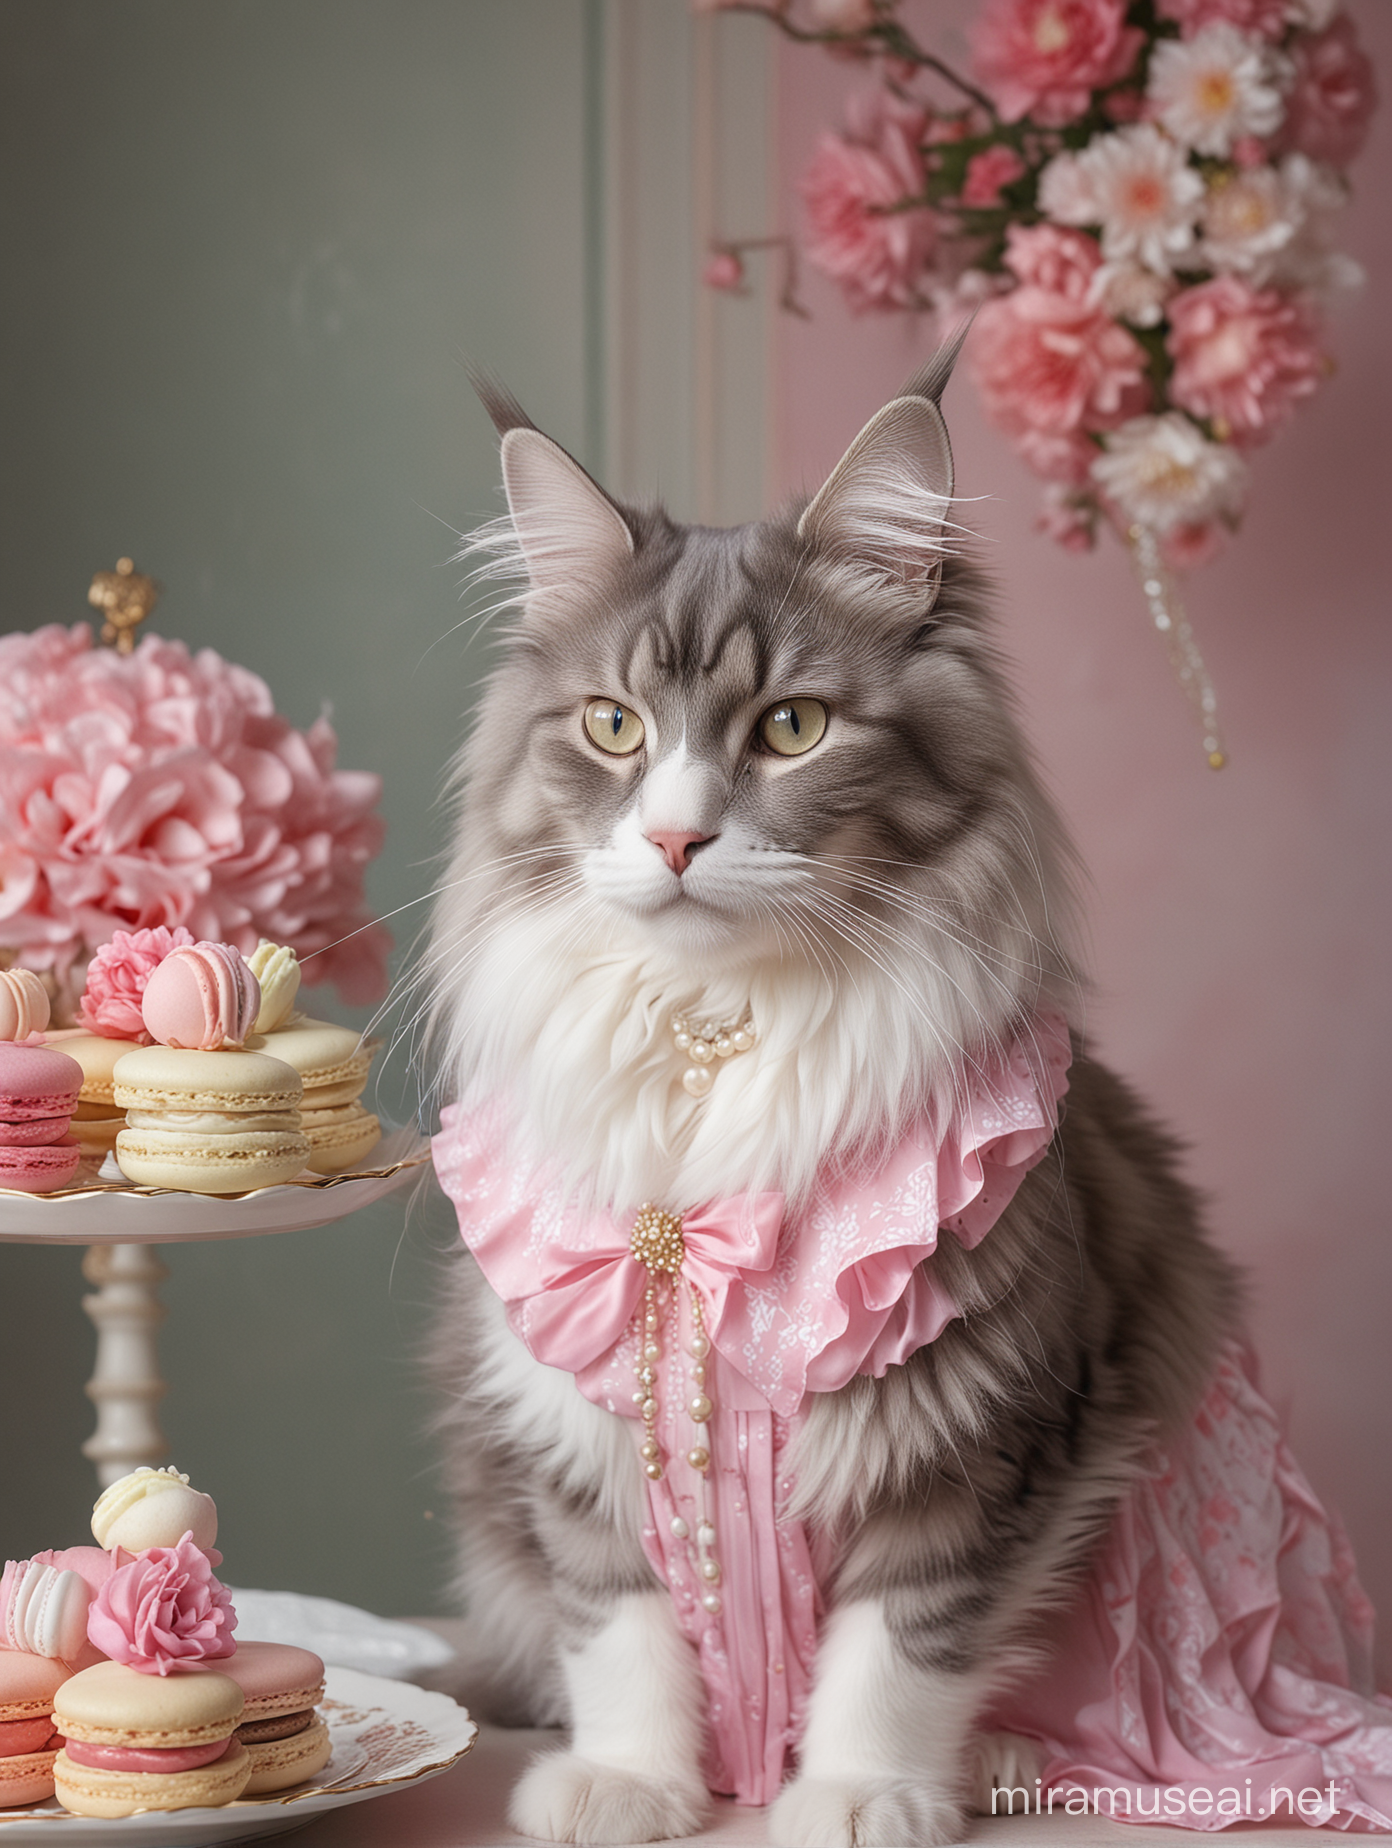 Elegant Maine Coon Cat in Pink Dress Amidst Colorful Macaron Tea Party